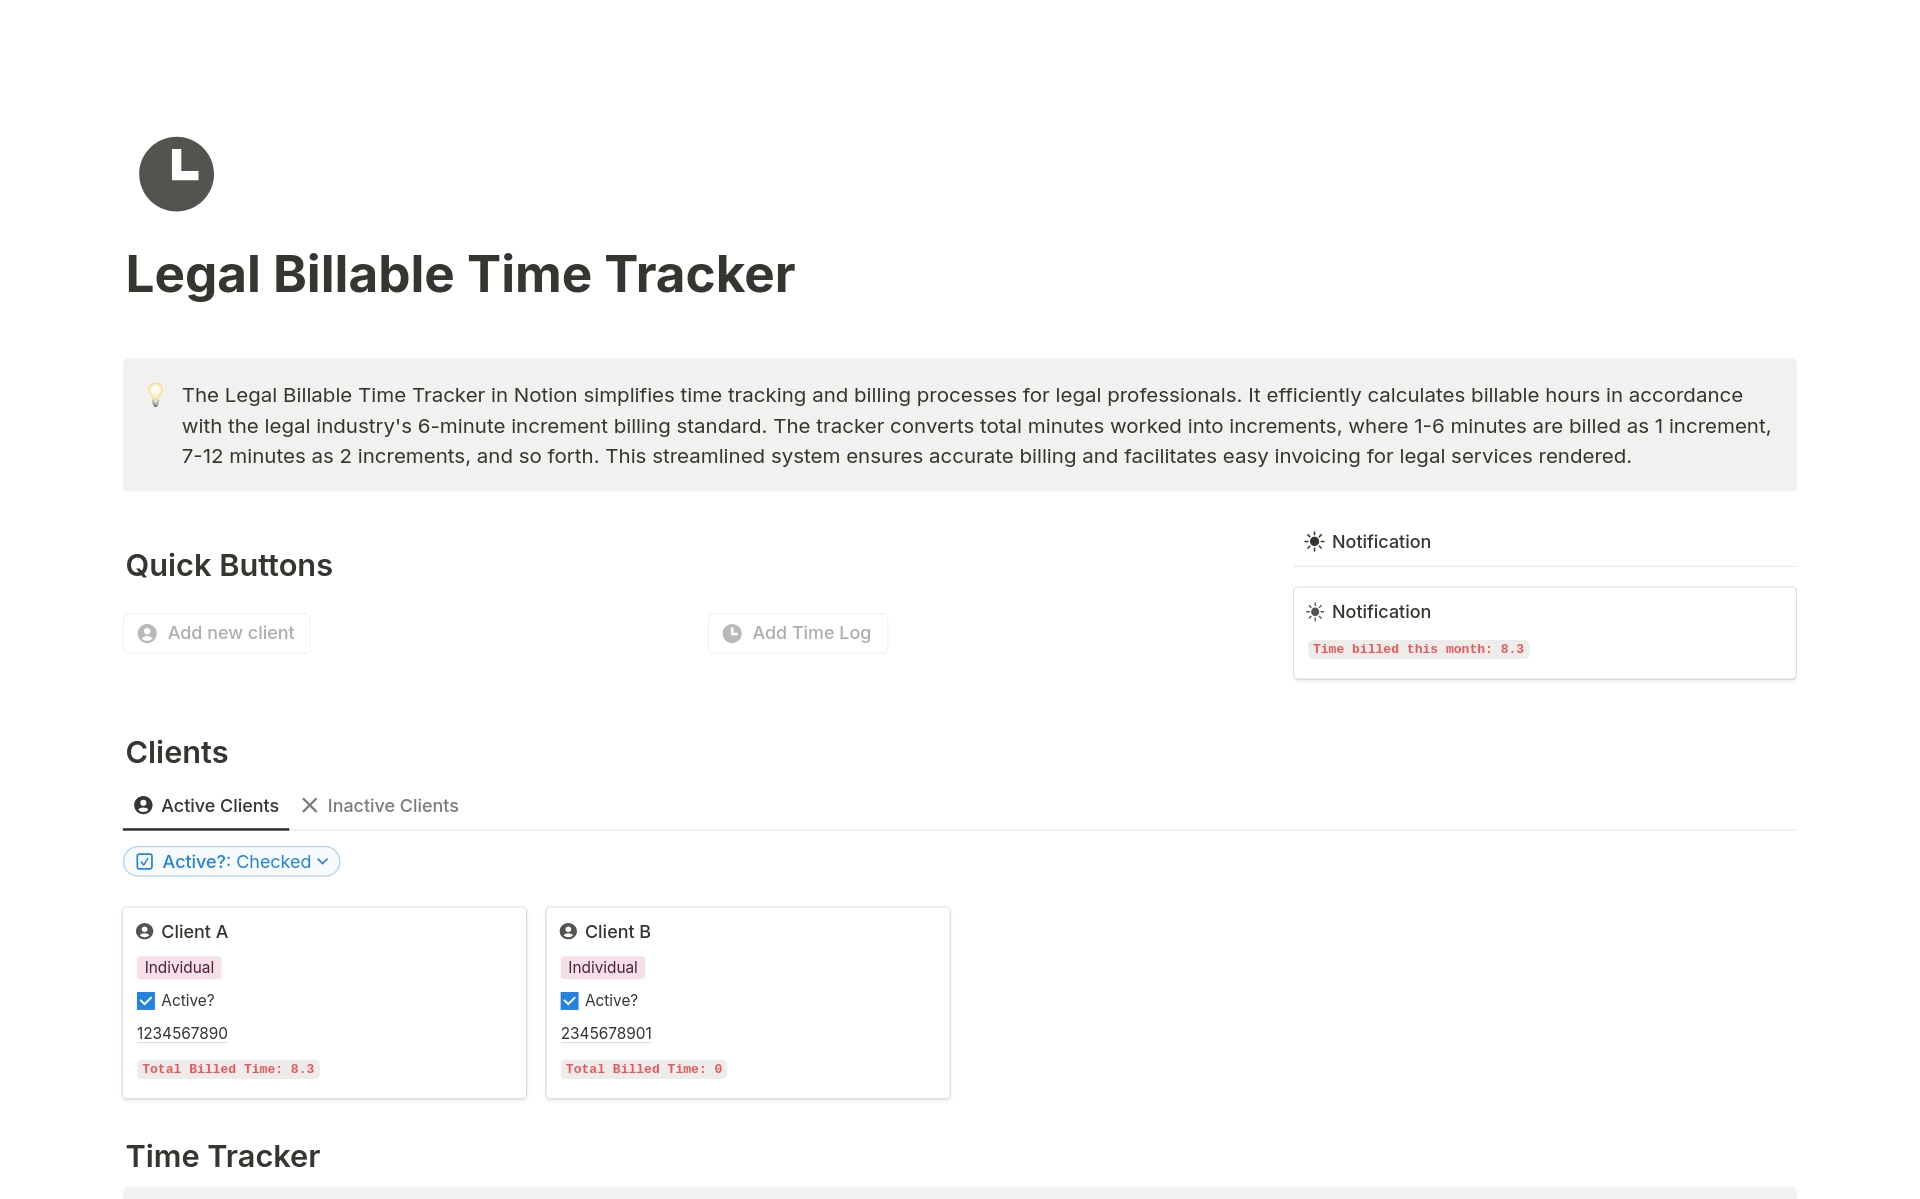 The Legal Billable Time Tracker in Notion simplifies time tracking and billing processes for legal professionals. It efficiently calculates billable hours in accordance with the legal industry's 6-minute increment billing standard.